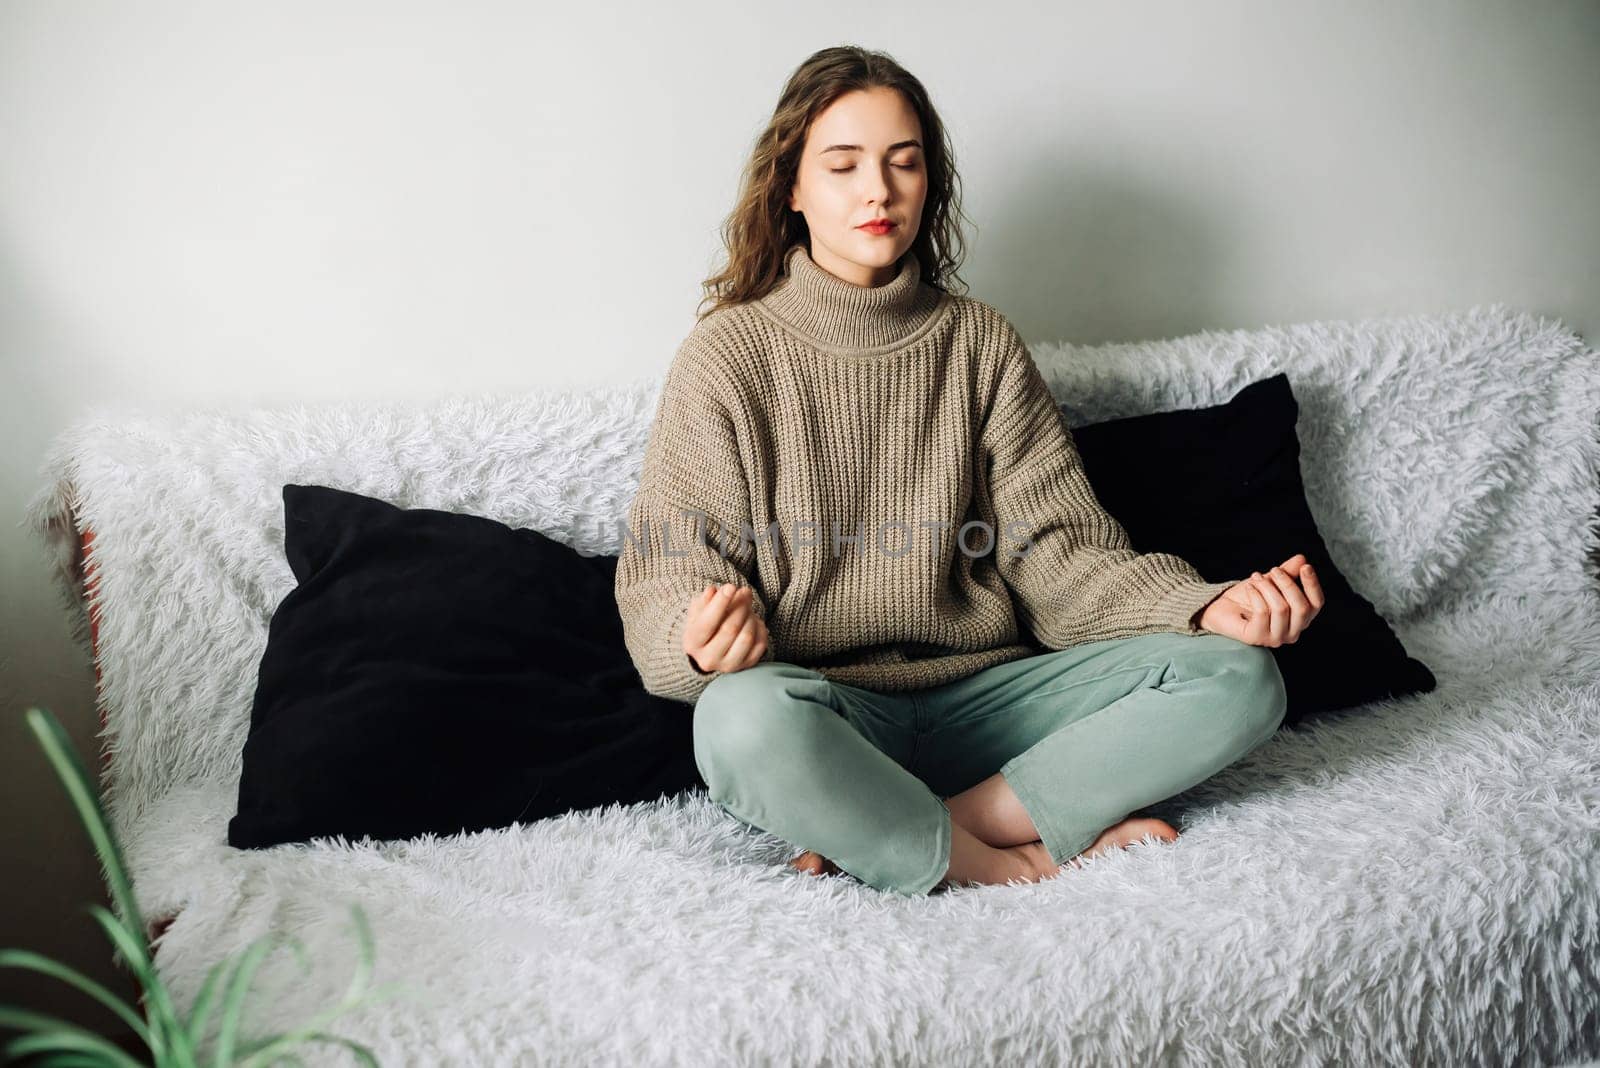 Young woman sitting in lotus position on the sofa with her hands on her knees, meditating, trying to relax her mind and relieve stress by ViShark